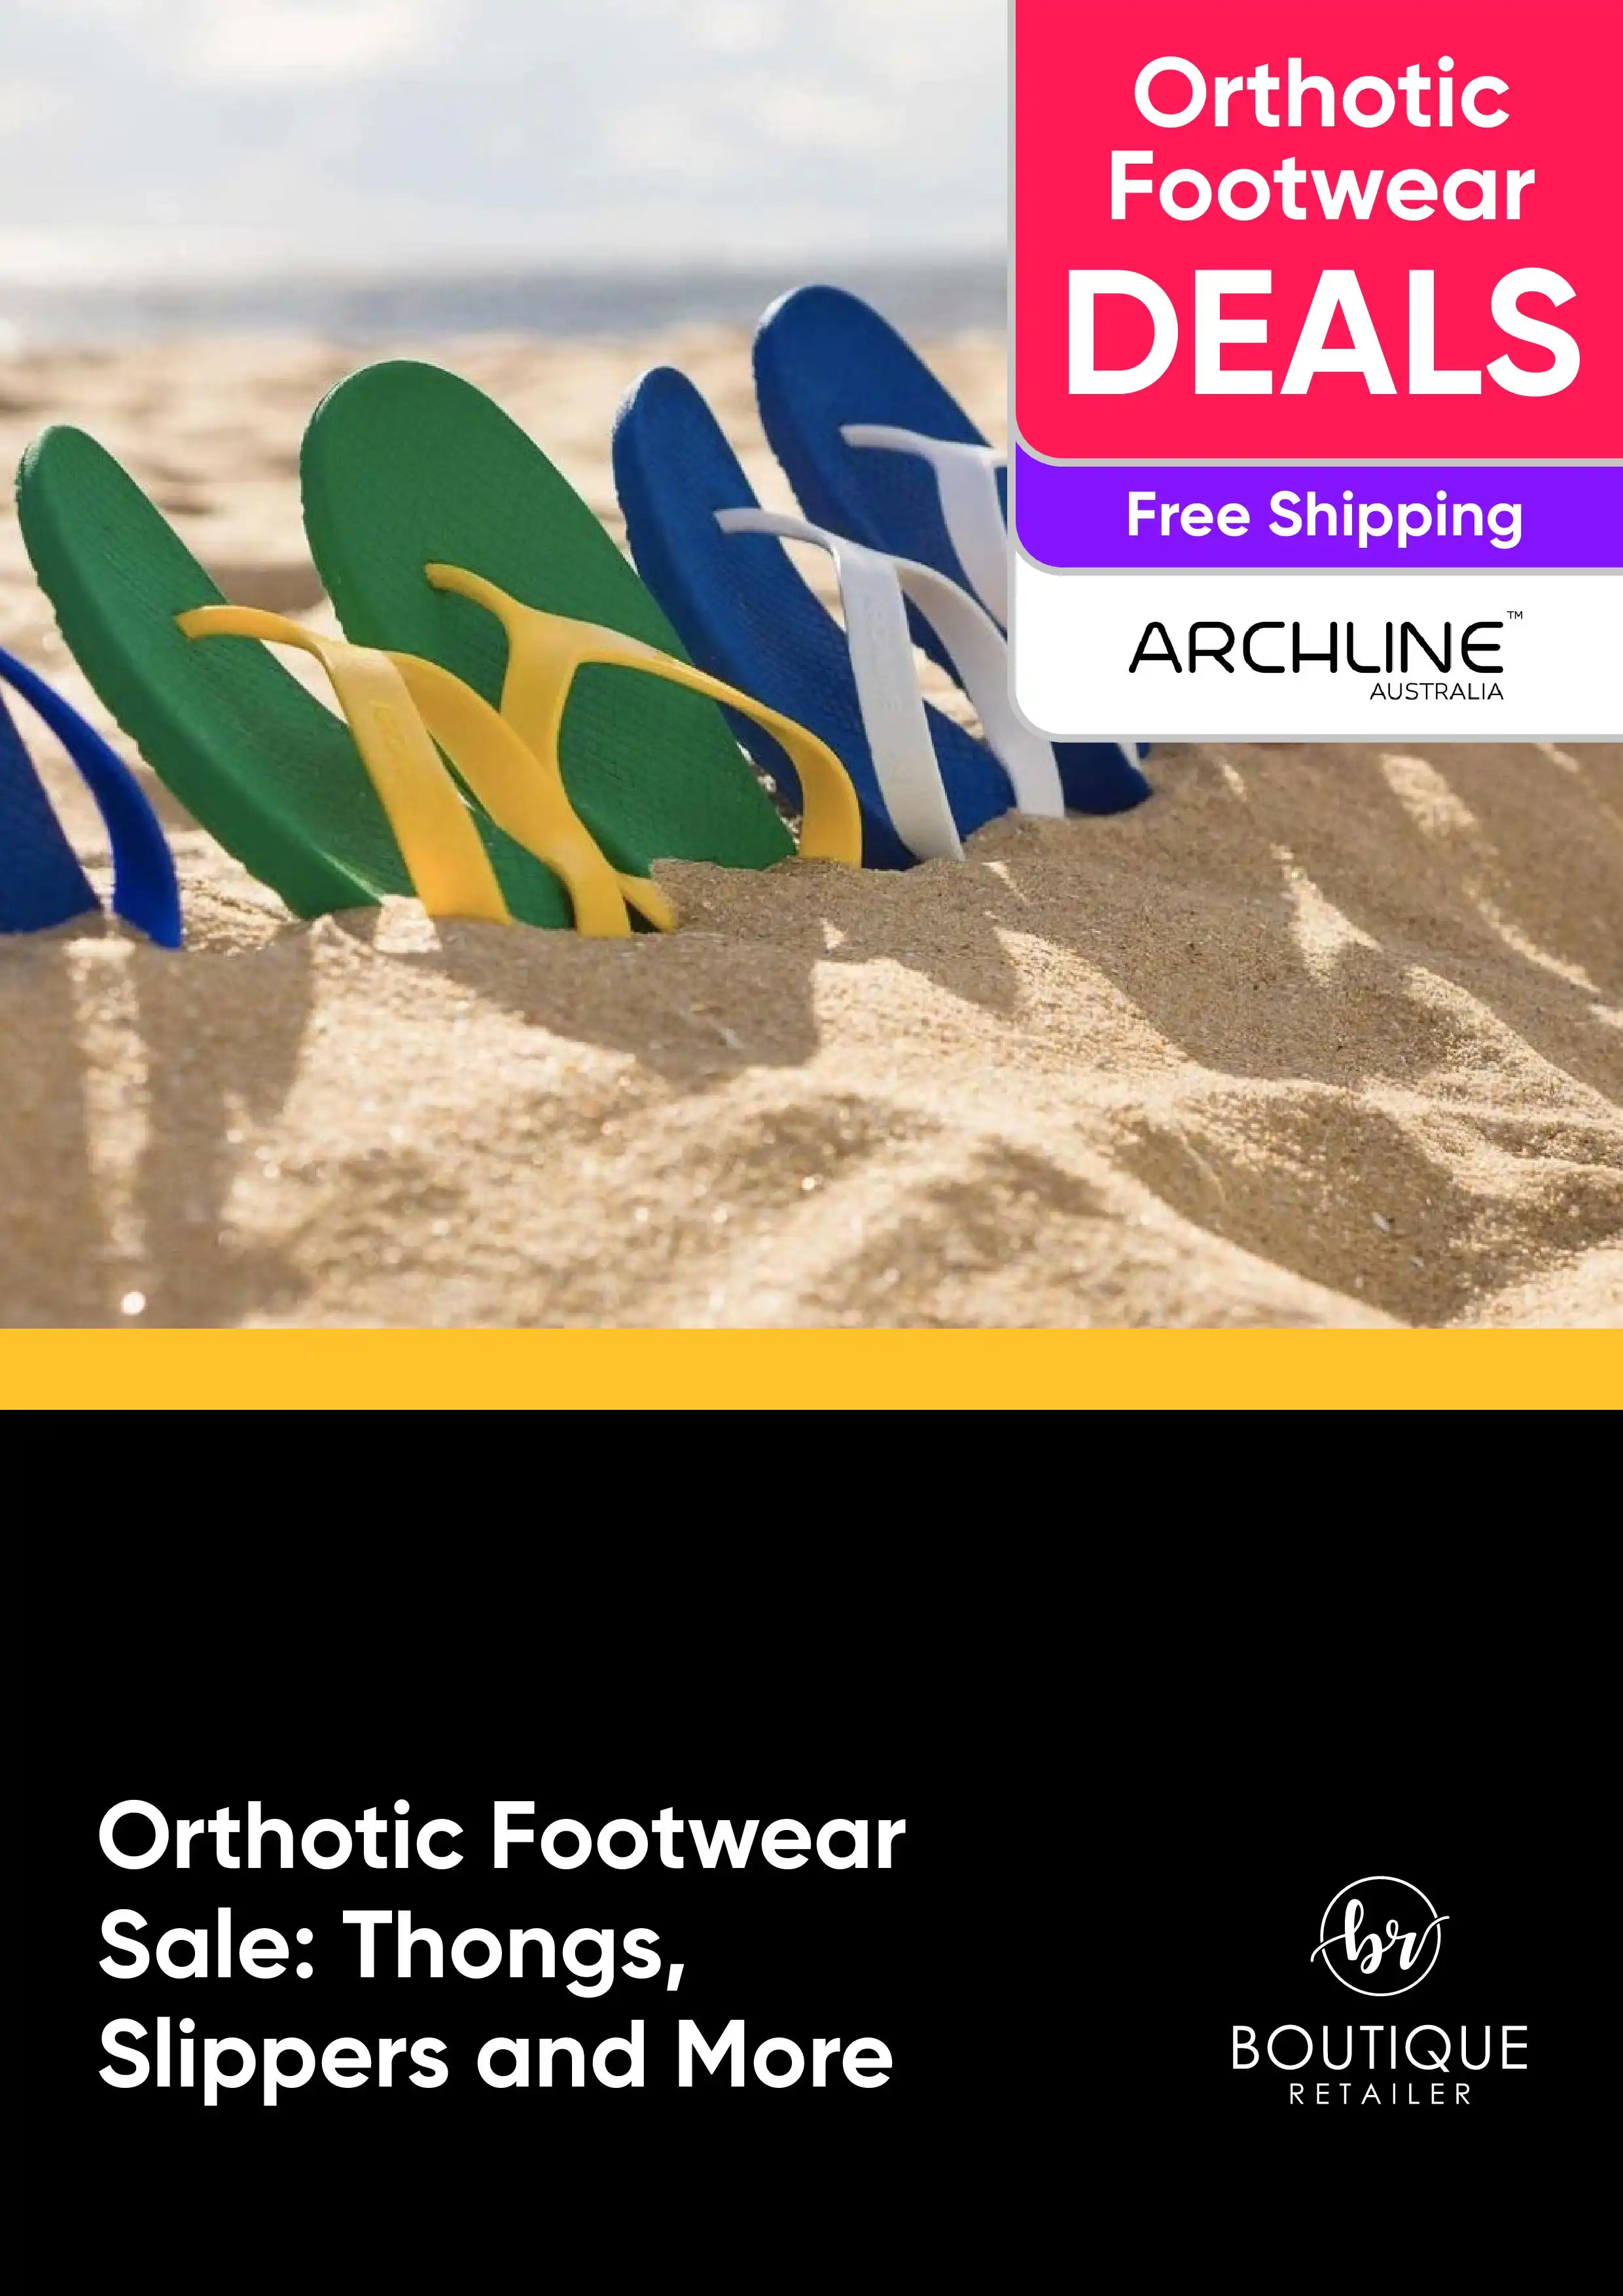 Orthotic Footwear Sale - Thongs, Slippers and More - Archline - Free Shipping